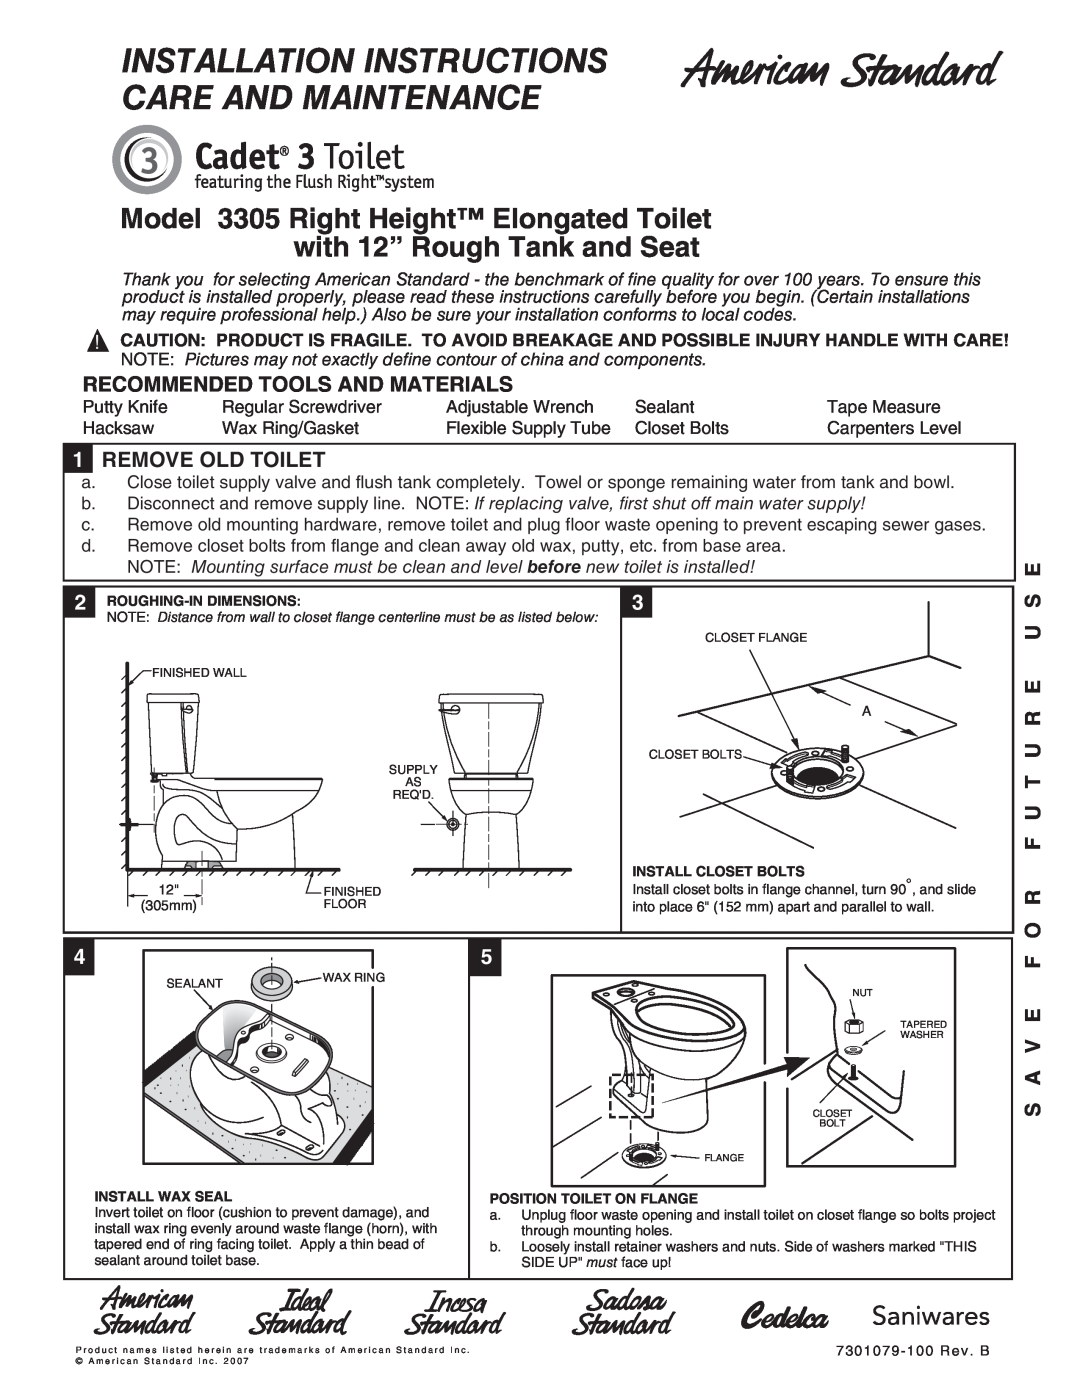 American Standard 3305 installation instructions Recommended Tools And Materials, 1REMOVE OLD TOILET, O R F U T U R E U S 